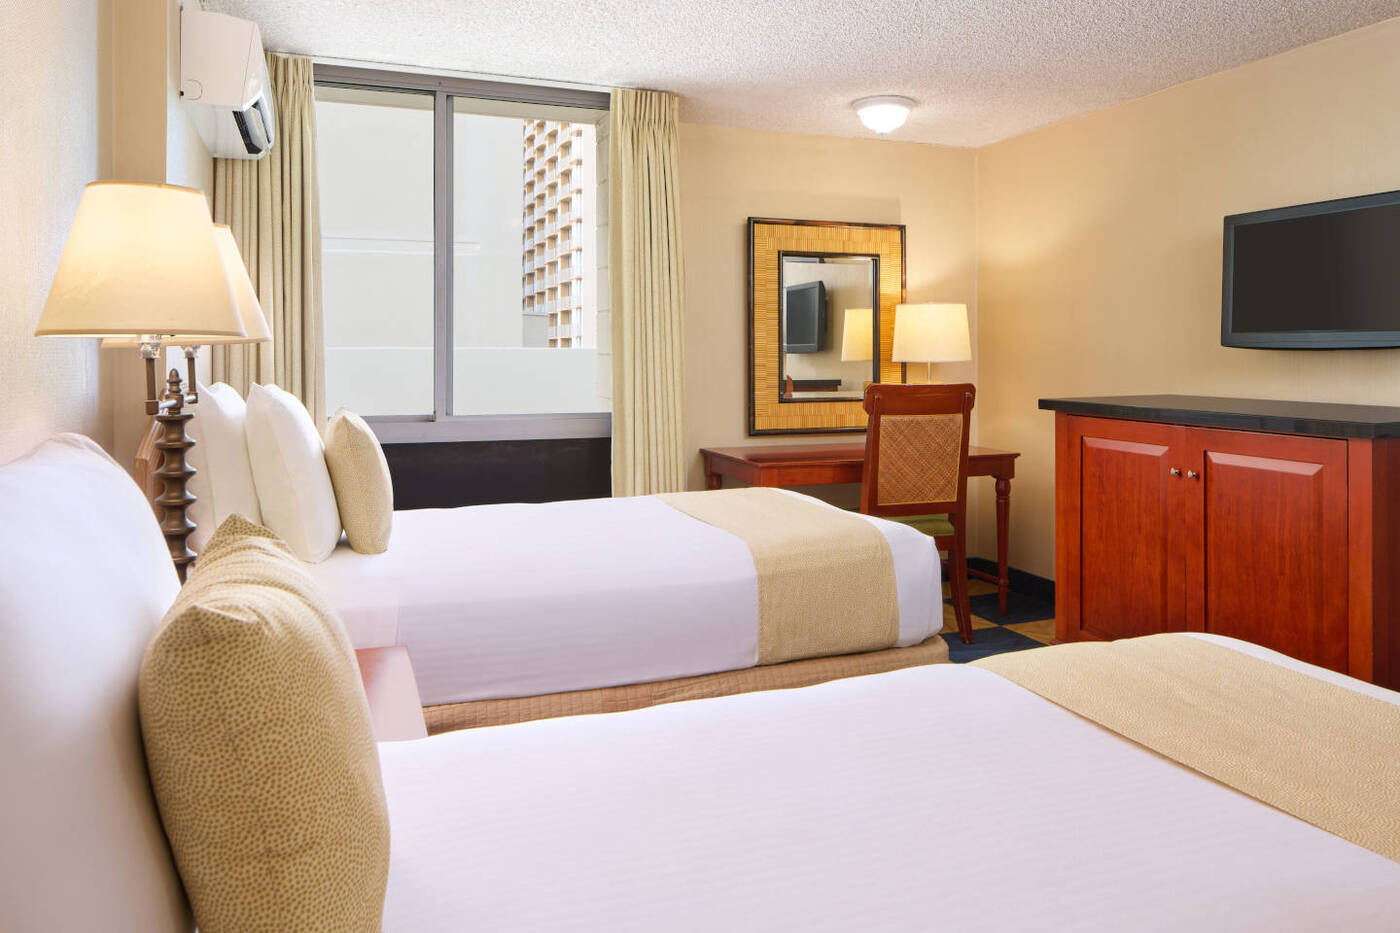 Moderate Hotel Room featuring a two-bed configuration that includes a desk and a television